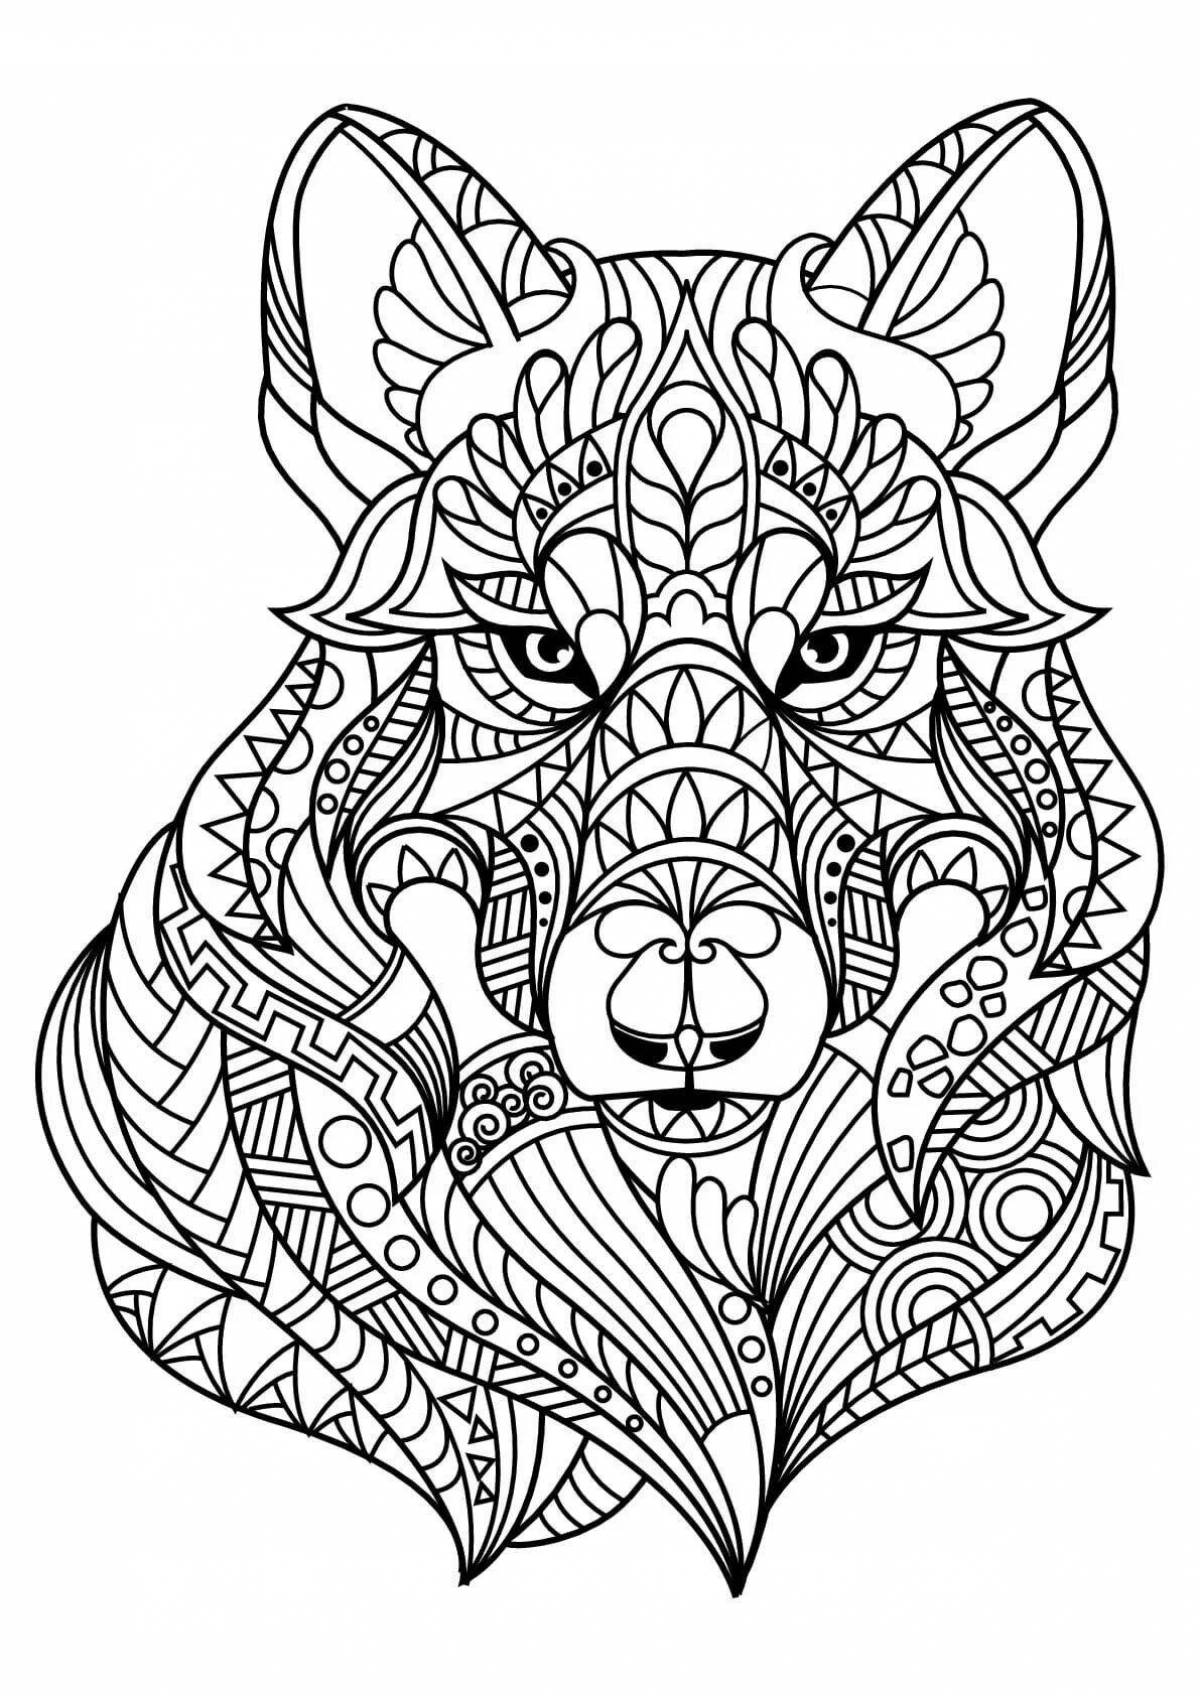 Fun coloring book for adults